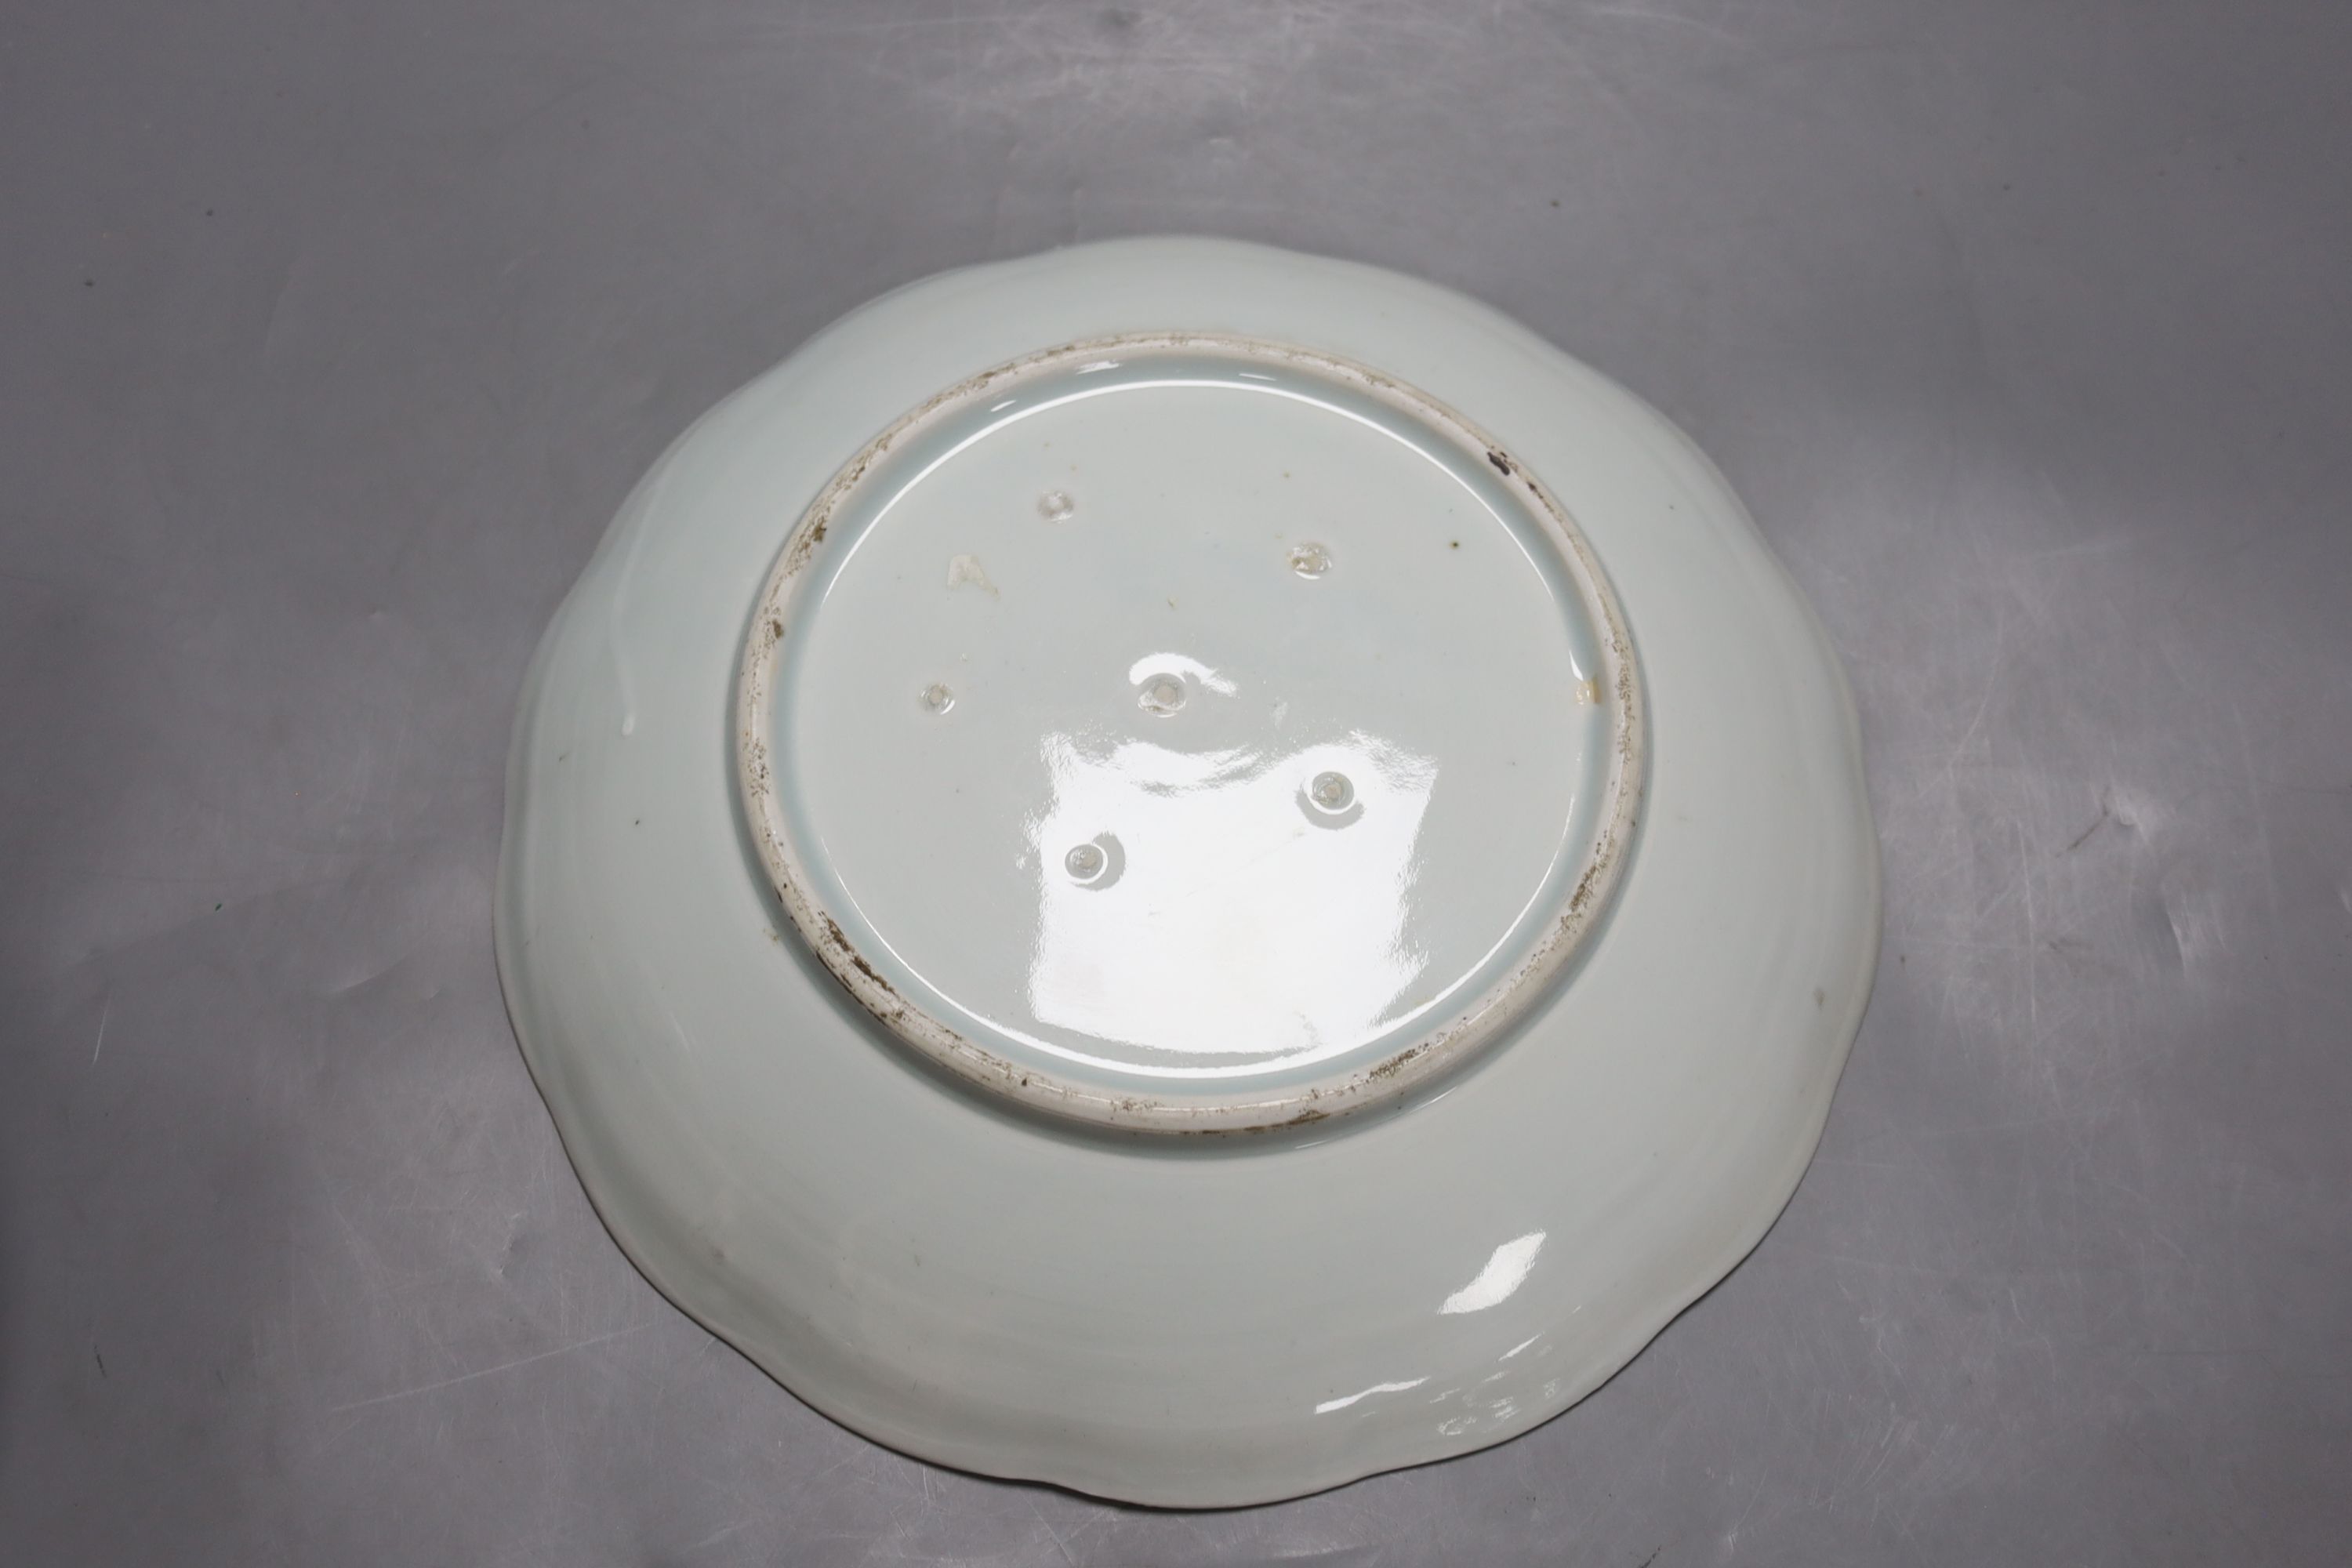 A Japanese Arita blue and white dish with scalloped edge, Dia 29cm and a modern Chinese jar